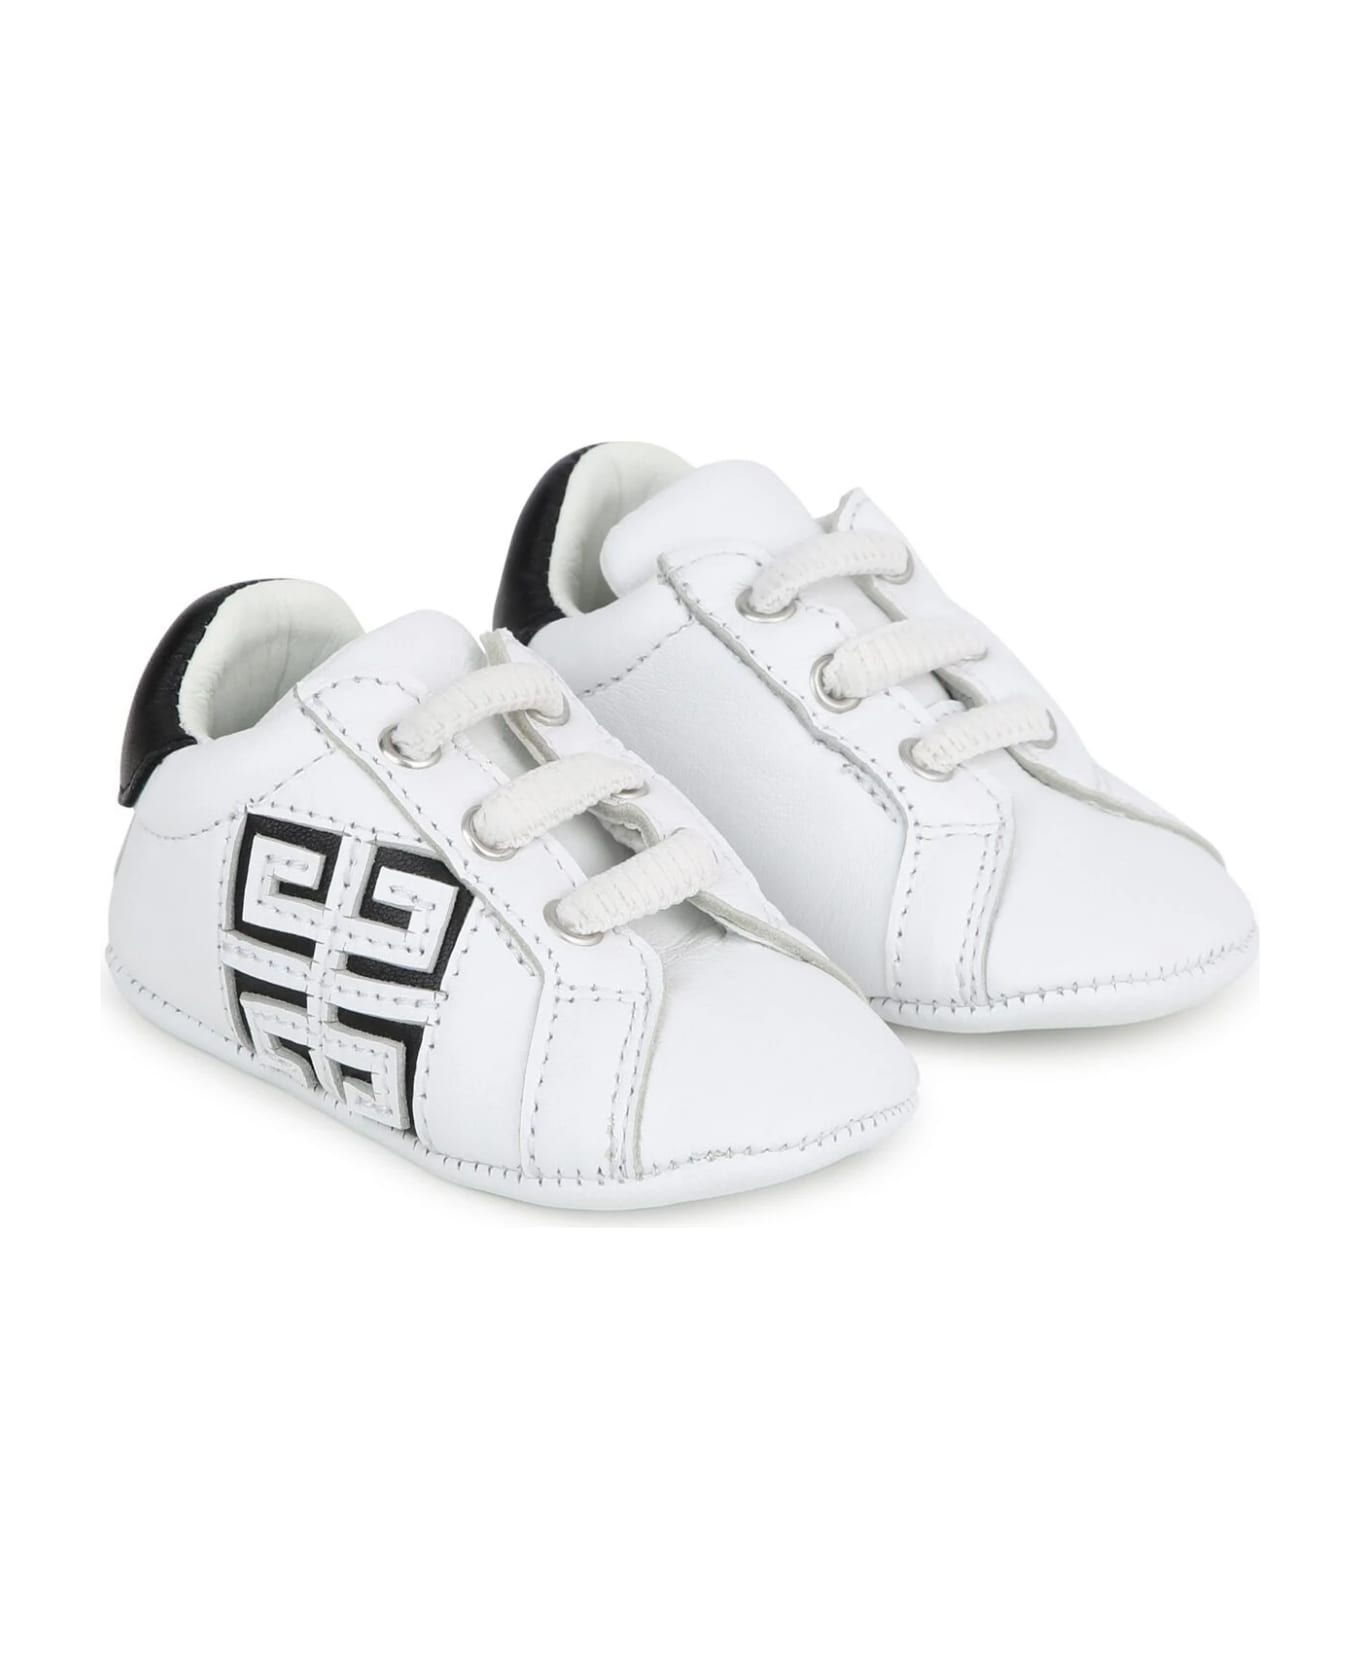 Givenchy White And Black 4g Sneakers - White シューズ